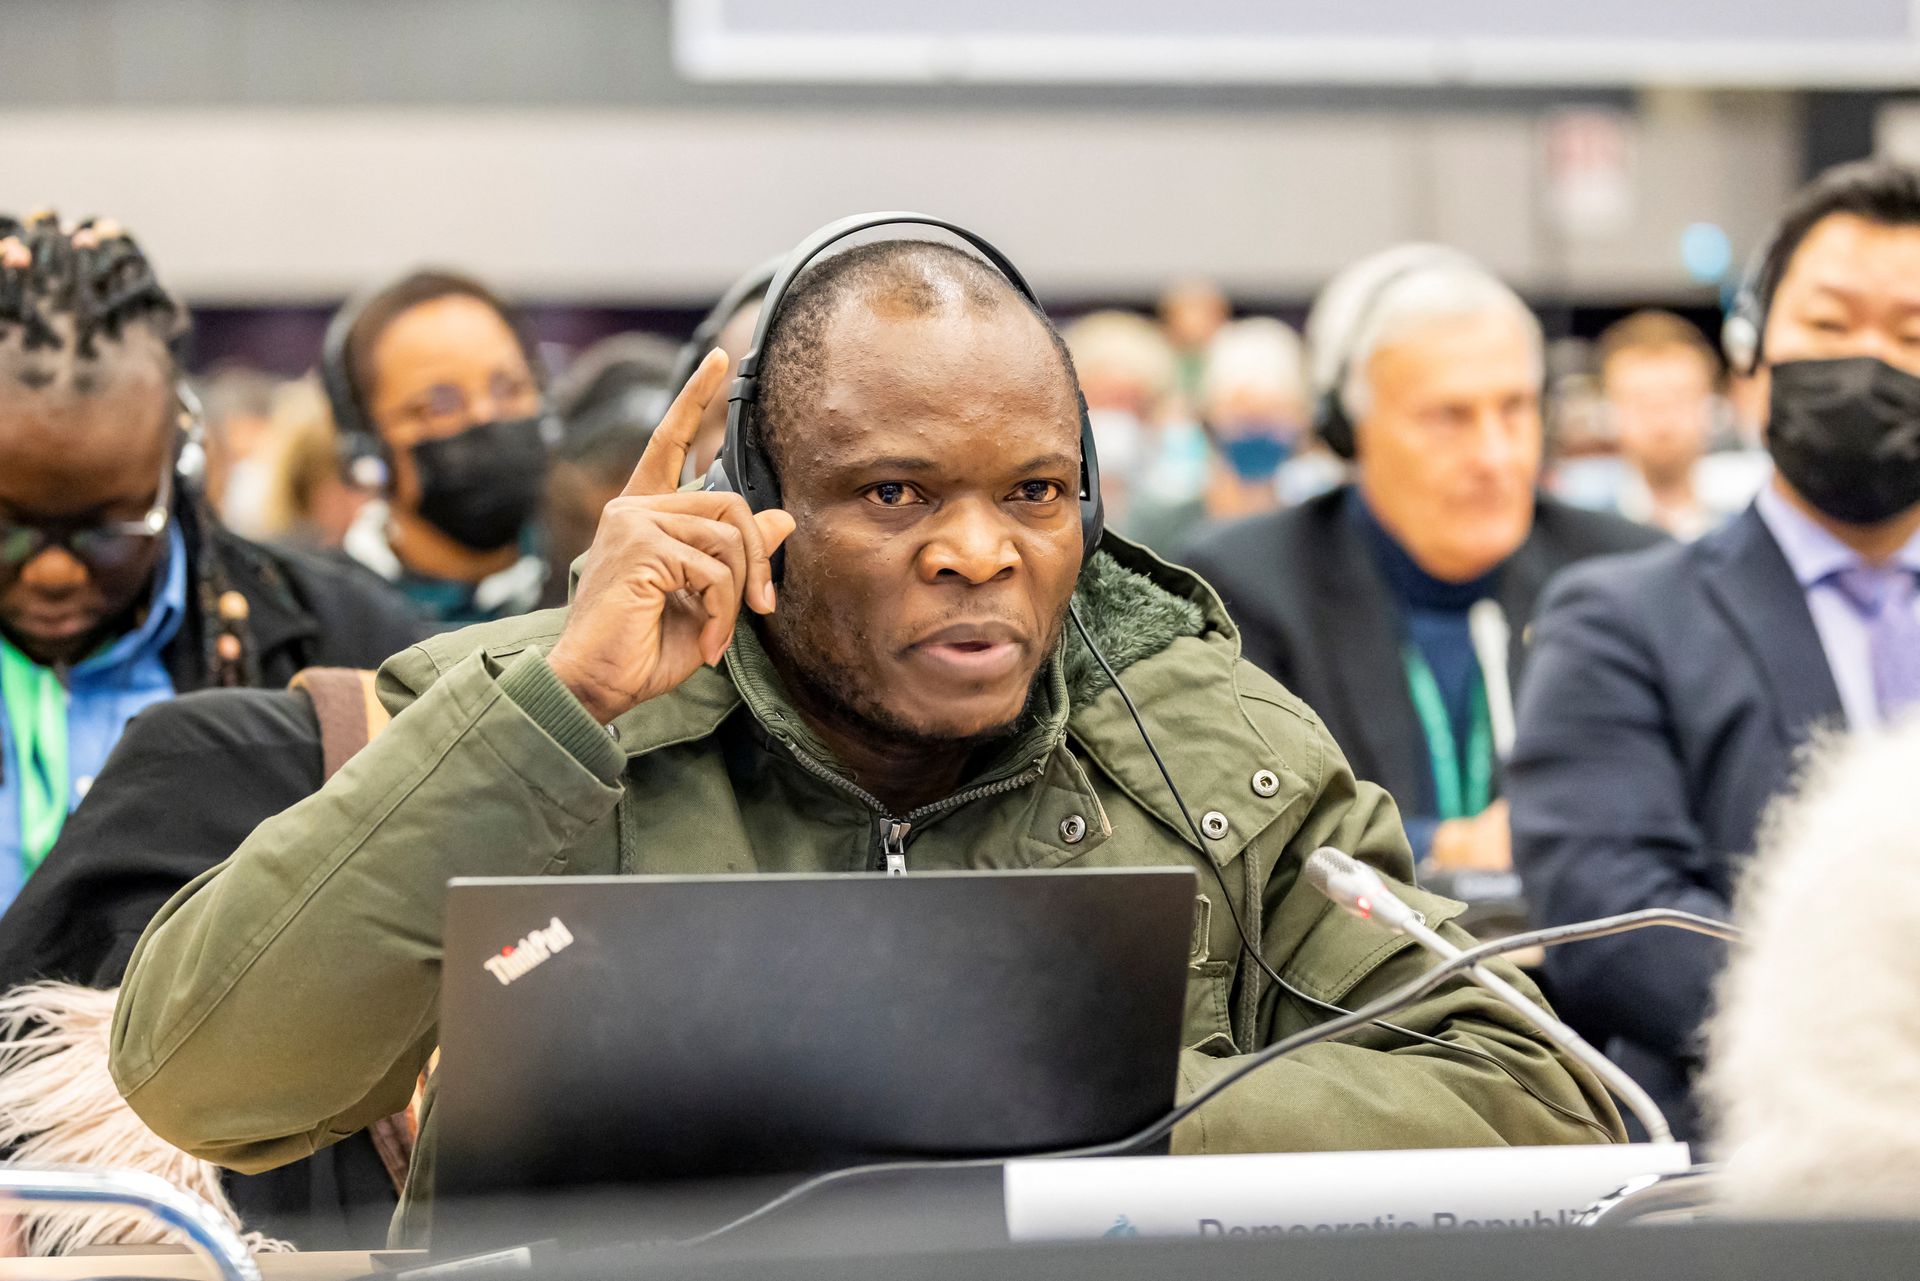 A representative from the Democratic Republic of Congo voices objections to The Kunming-Montreal Global Biodiversity Framework before it was passed by the president of the U.N.-backed COP15 biodiversity conference, China's Minister of Ecology and Environment Huang Runqiu, in Montreal, Quebec, Canada, 19 December 2022. Photo: Julian Haber / UN Biodiversity / REUTERS